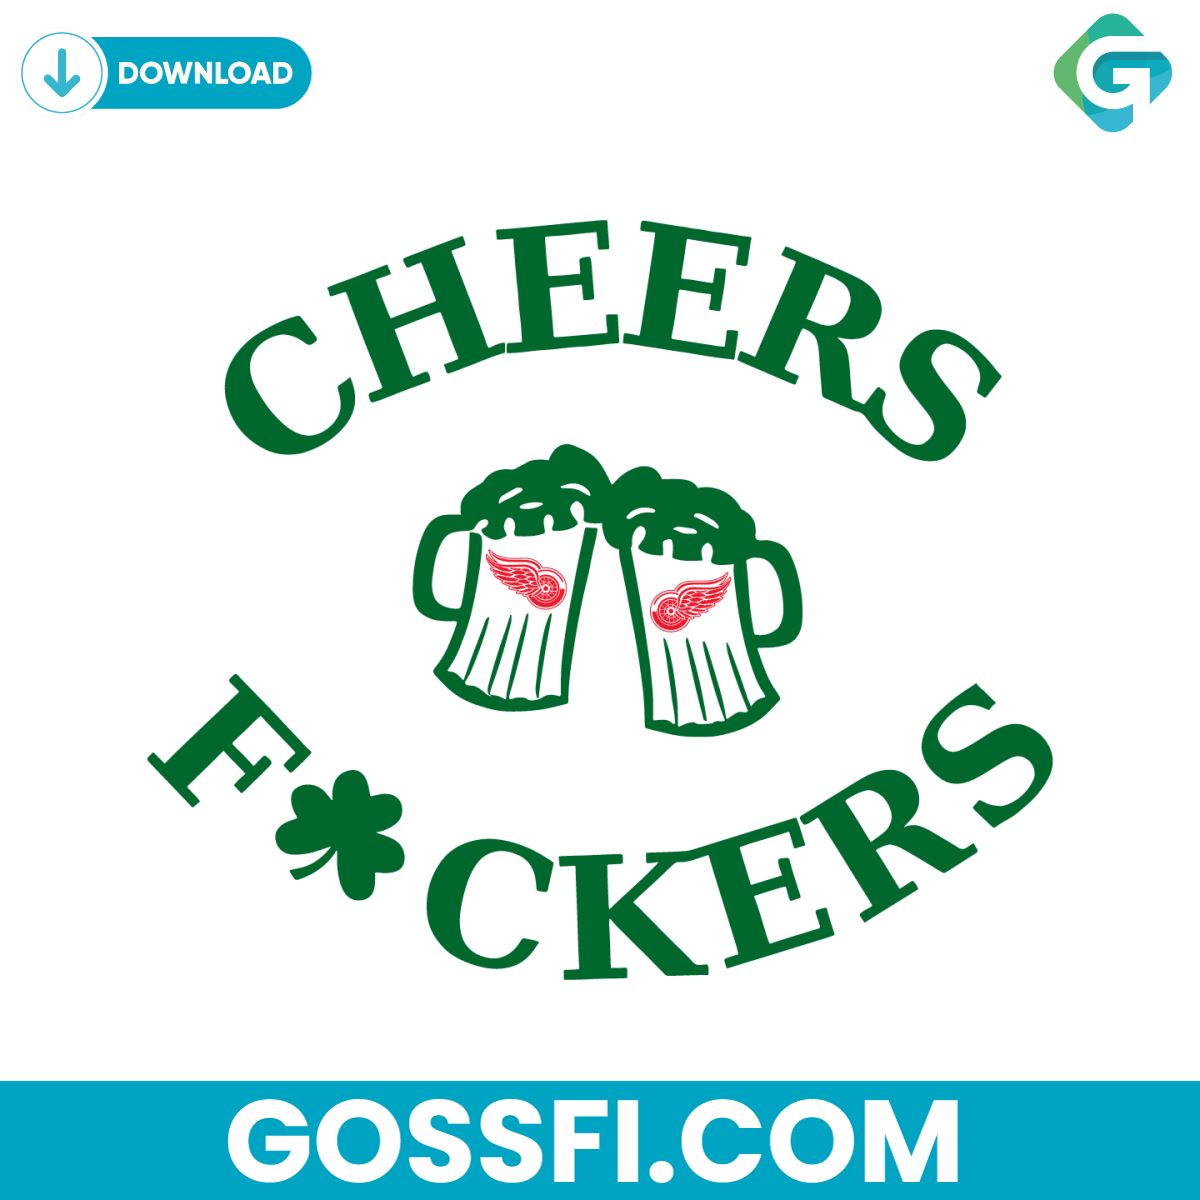 funny-st-patricks-day-cheers-fckers-detroit-red-wing-svg